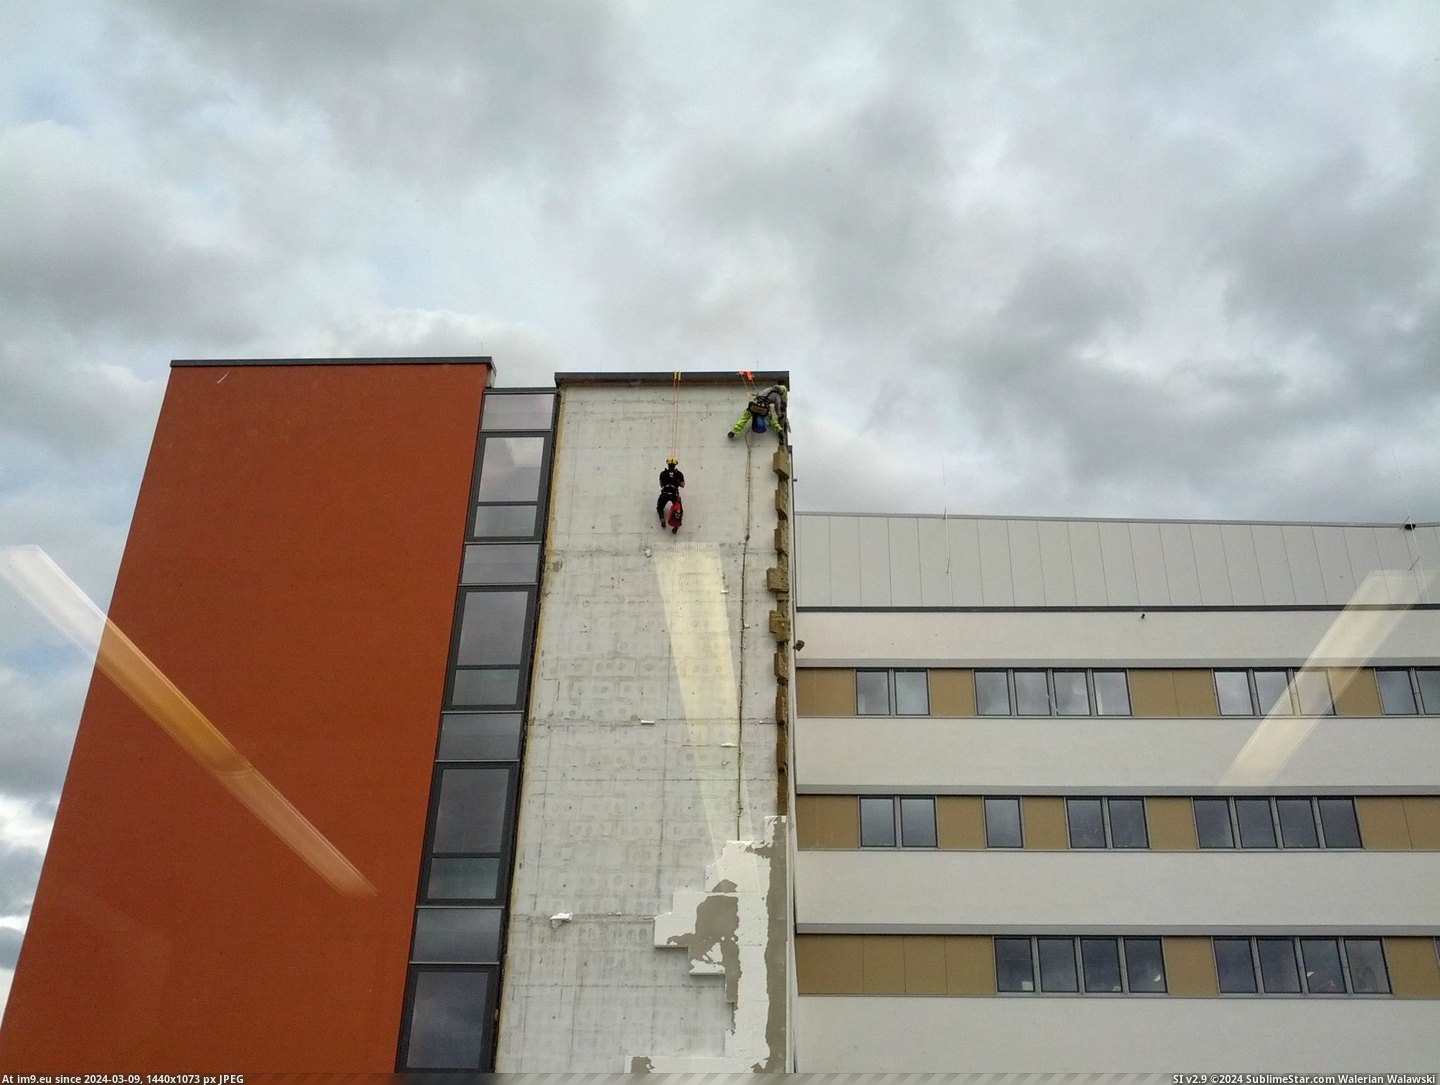 #Was #Off #Building #Fell #Lab #Wall #Sitting [Pics] Was sitting in the lab when the wall of the next building fell off. 5 Pic. (Изображение из альбом My r/PICS favs))